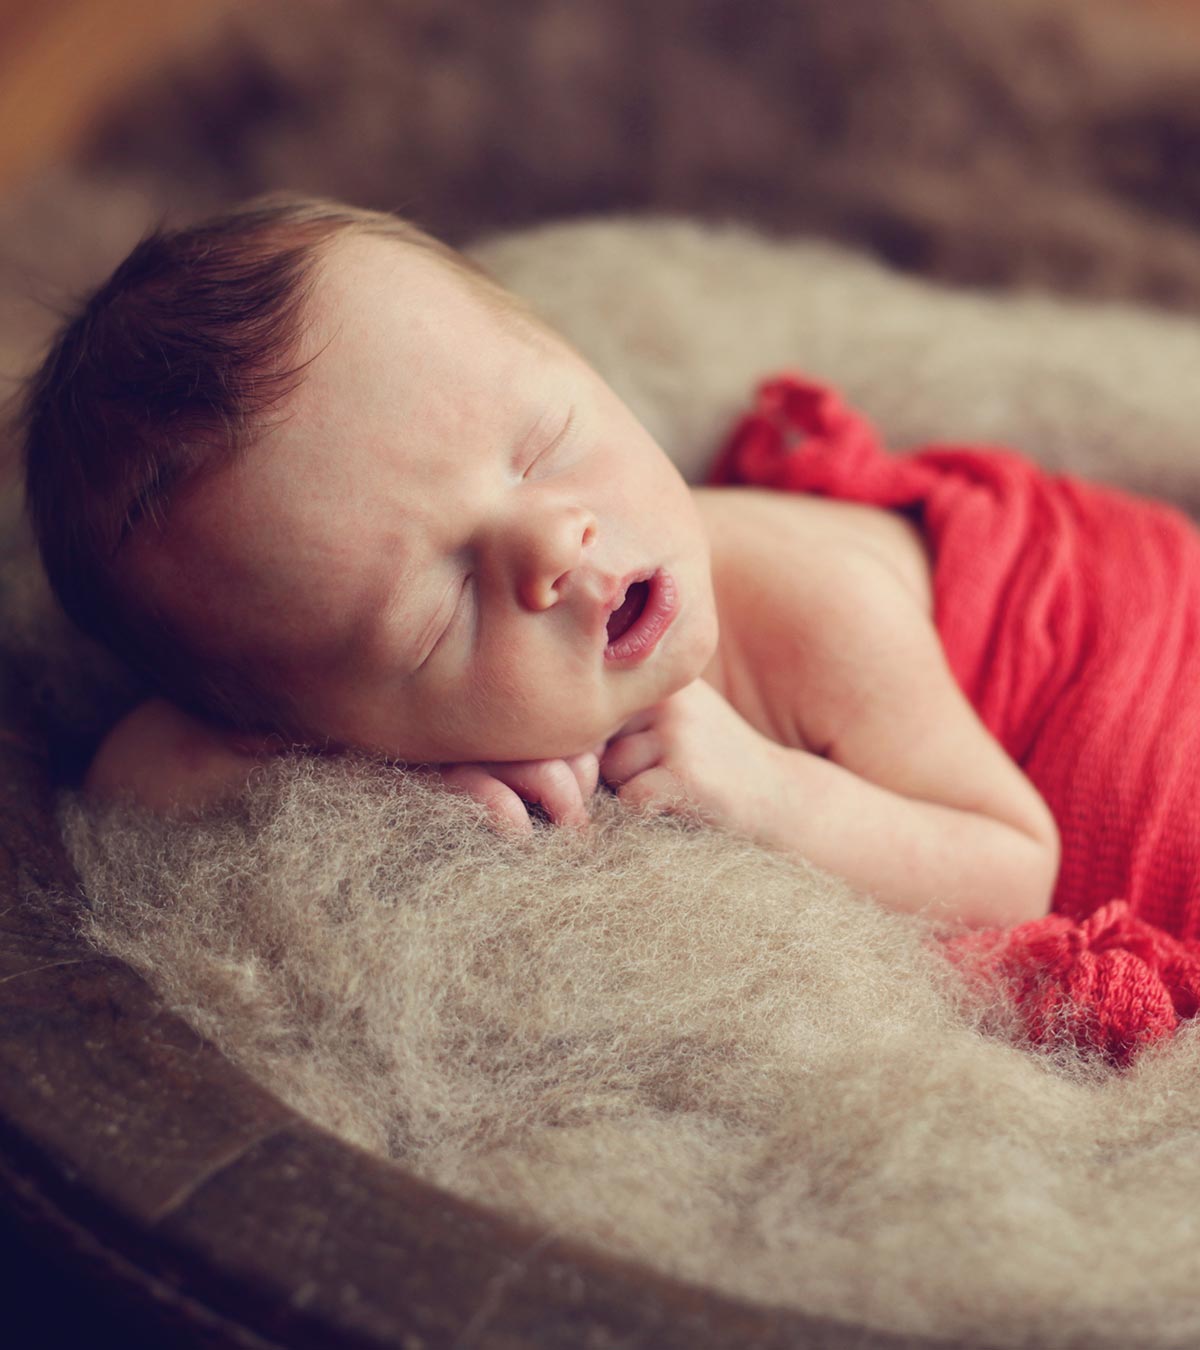 50 Irish And Romany Gypsy Baby Names, With Meanings